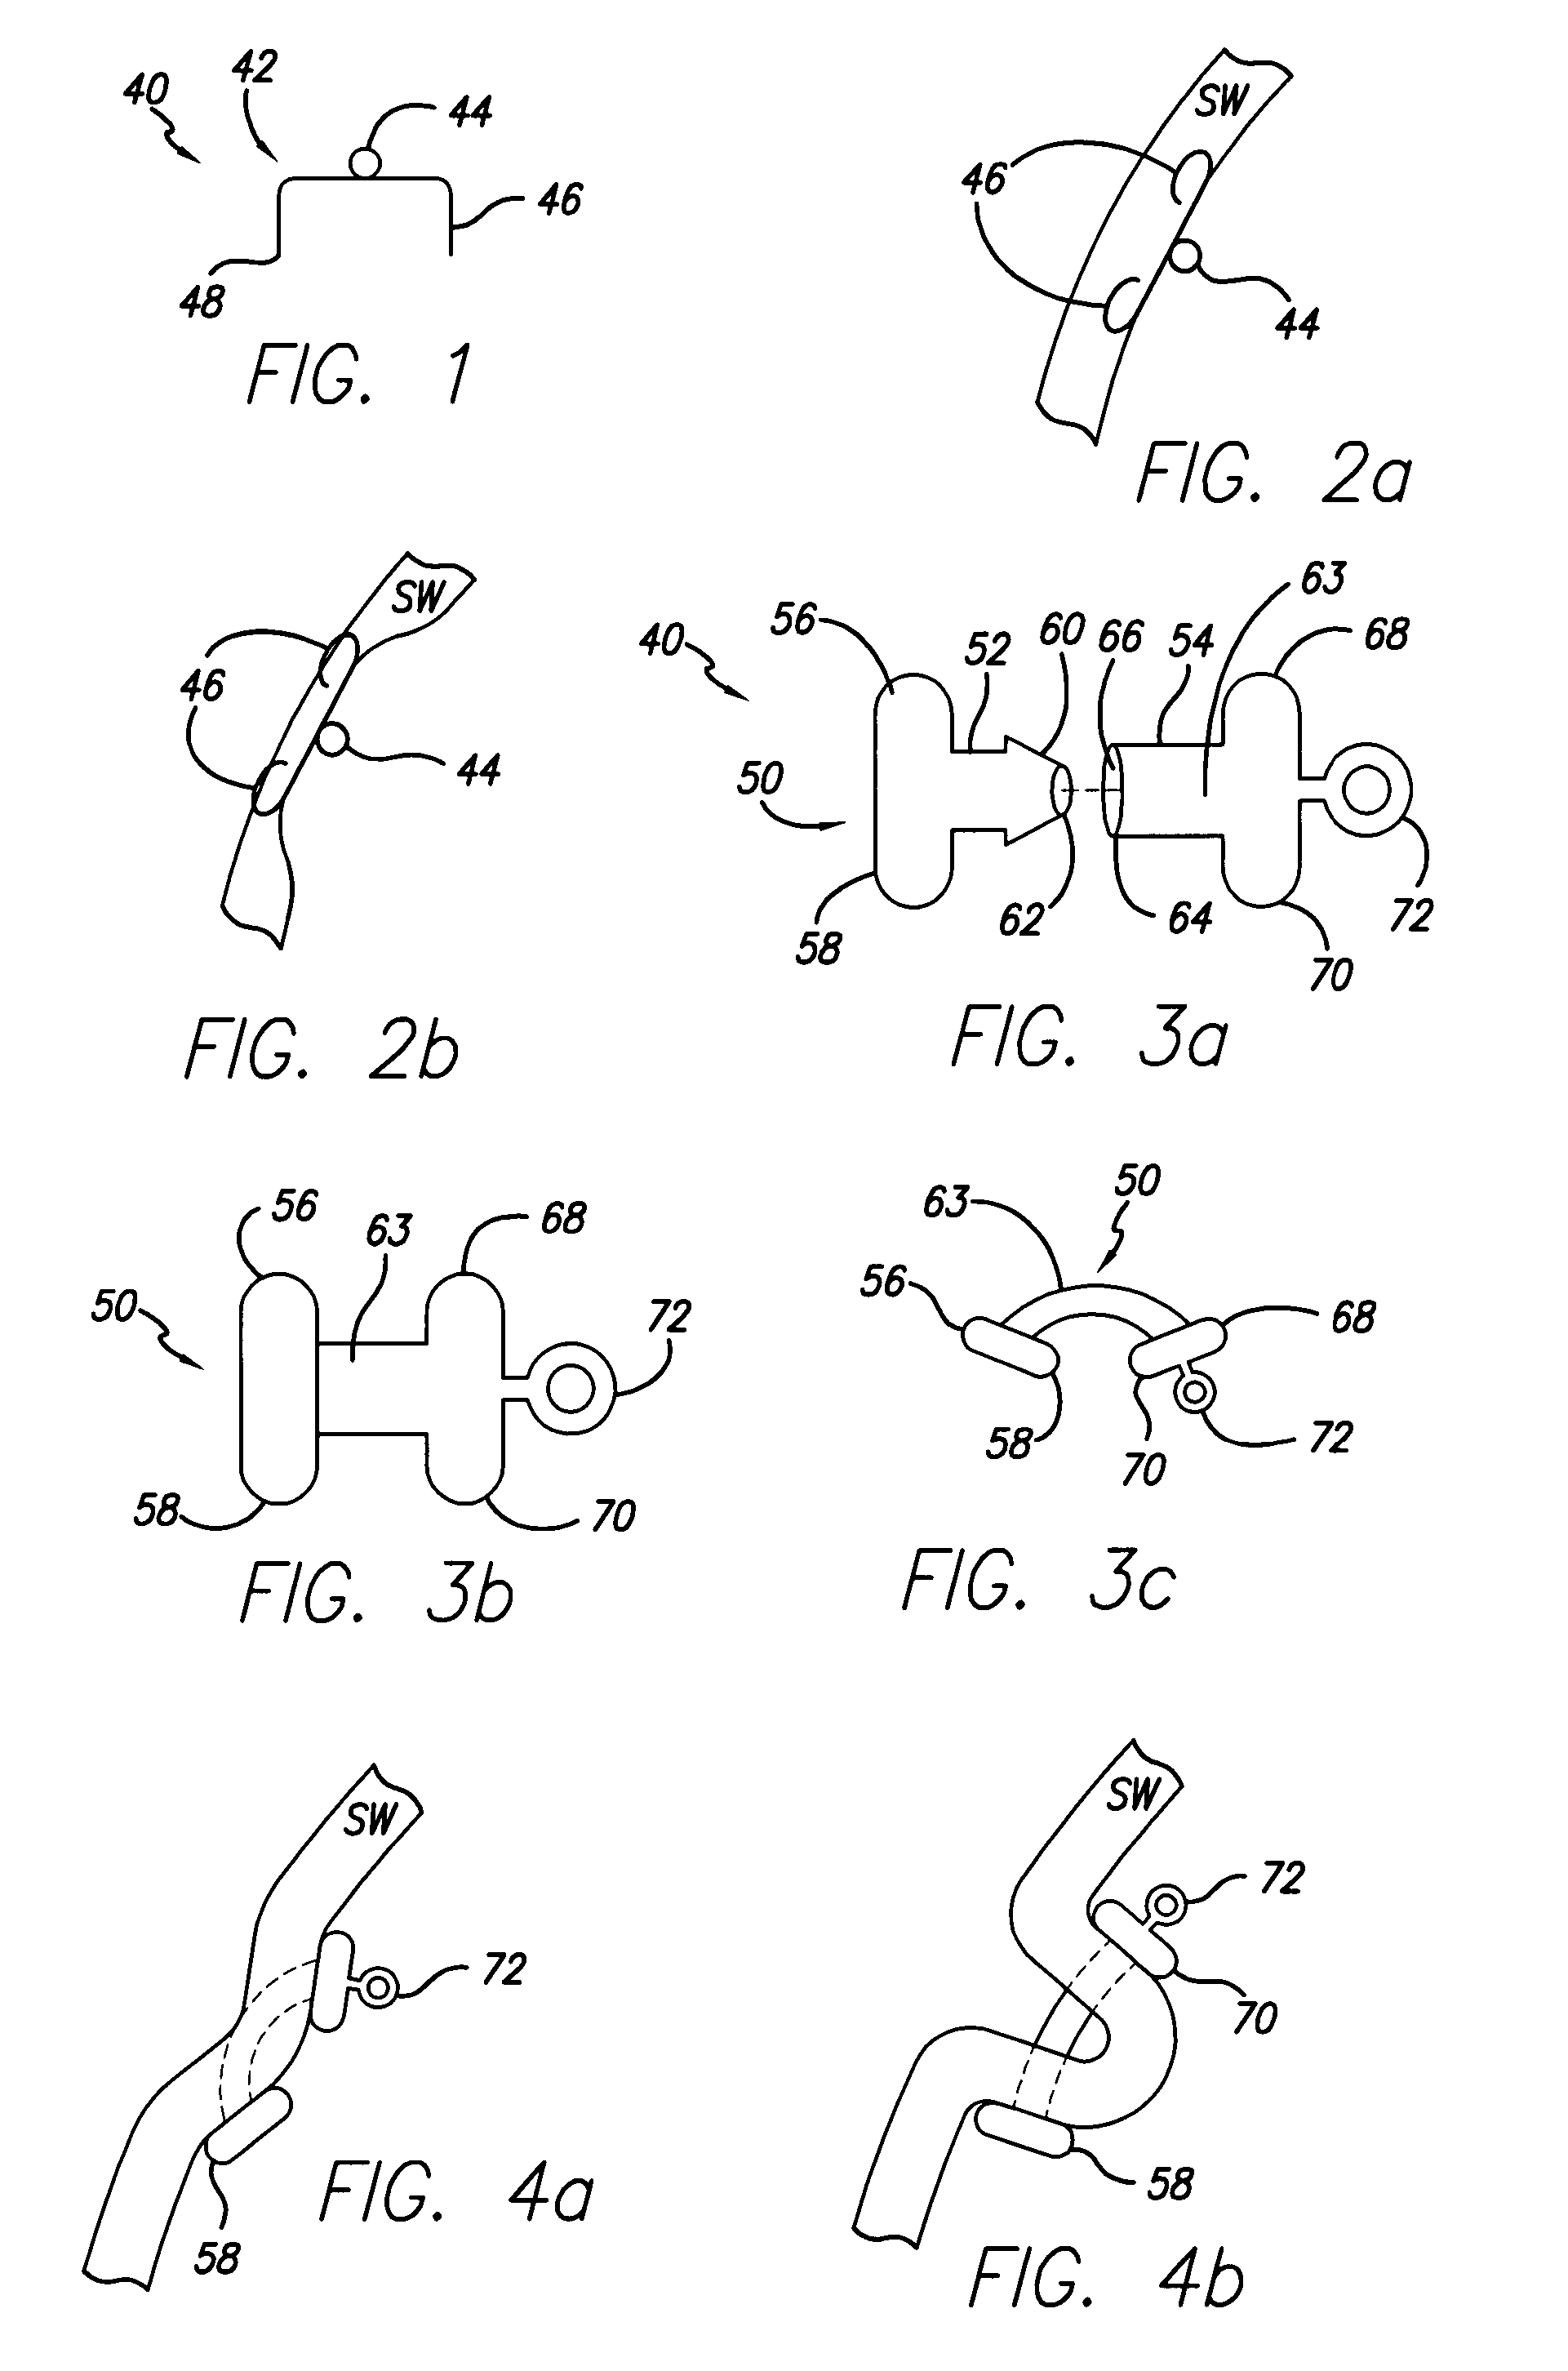 Methods and devices for reducing hollow organ volume